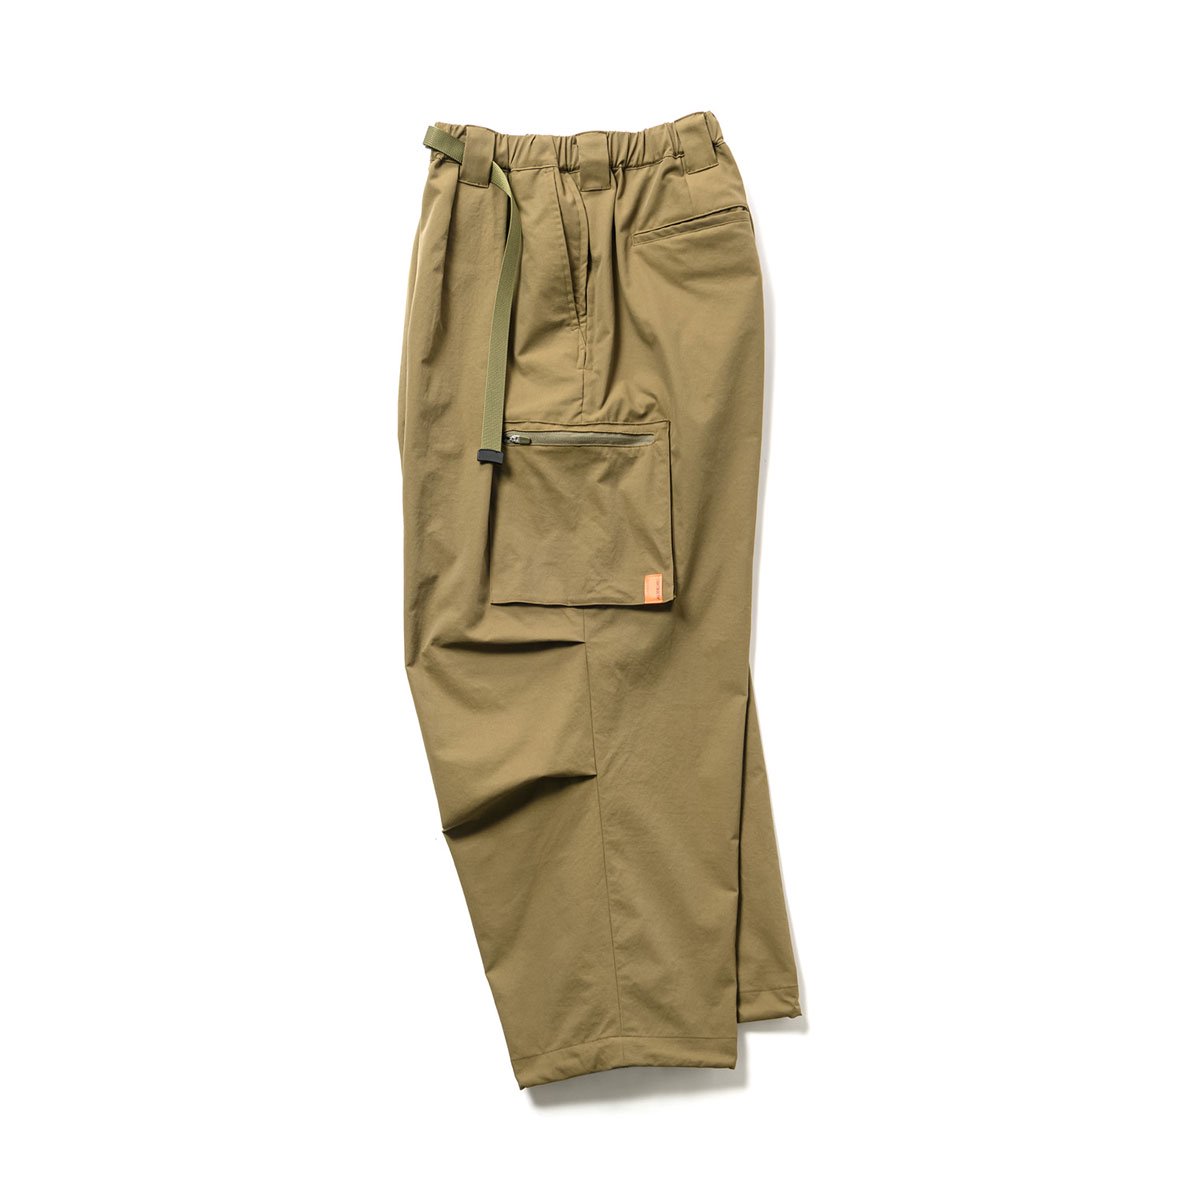 TECH TWILL CARGO PANTS - TIGHTBOOTH PRODUCTION